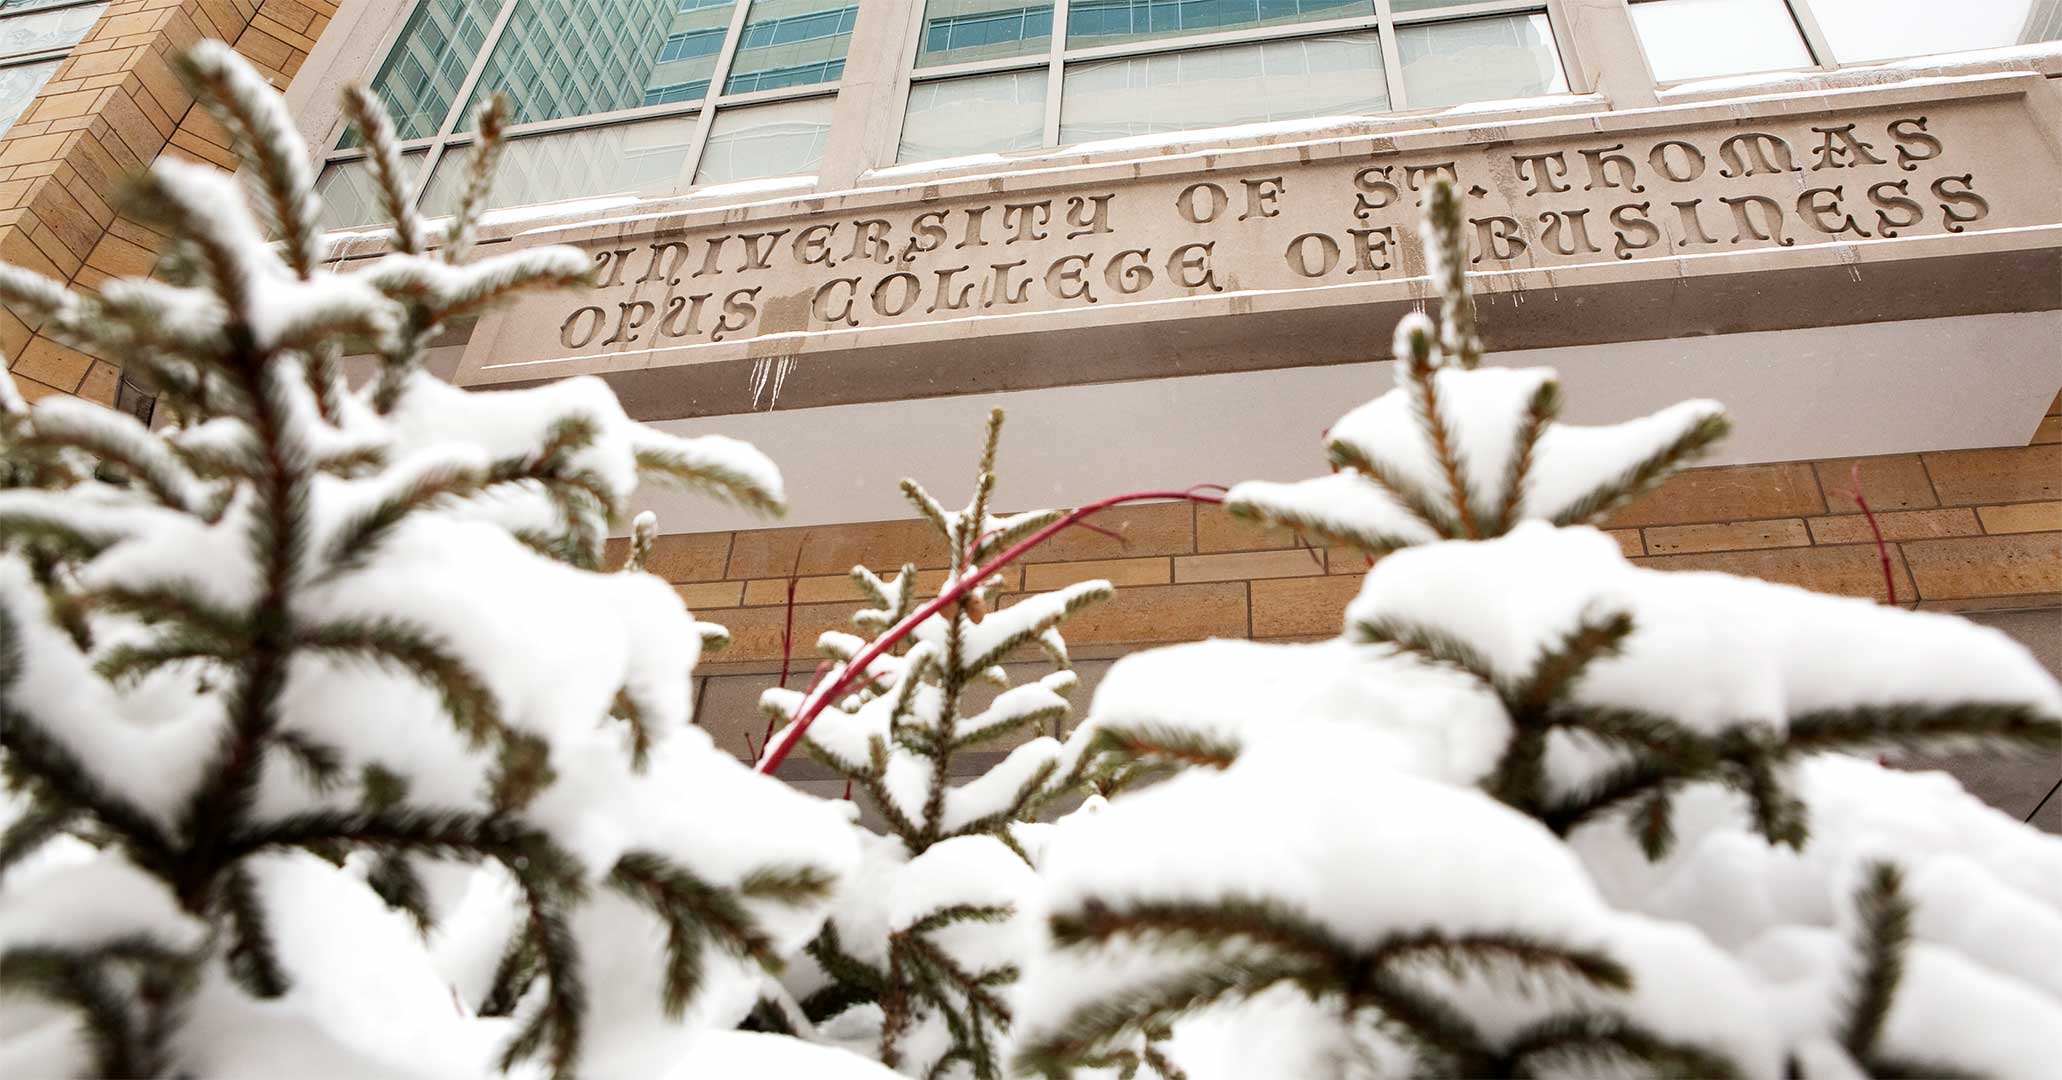 Exterior of Opus College of Business building in winter